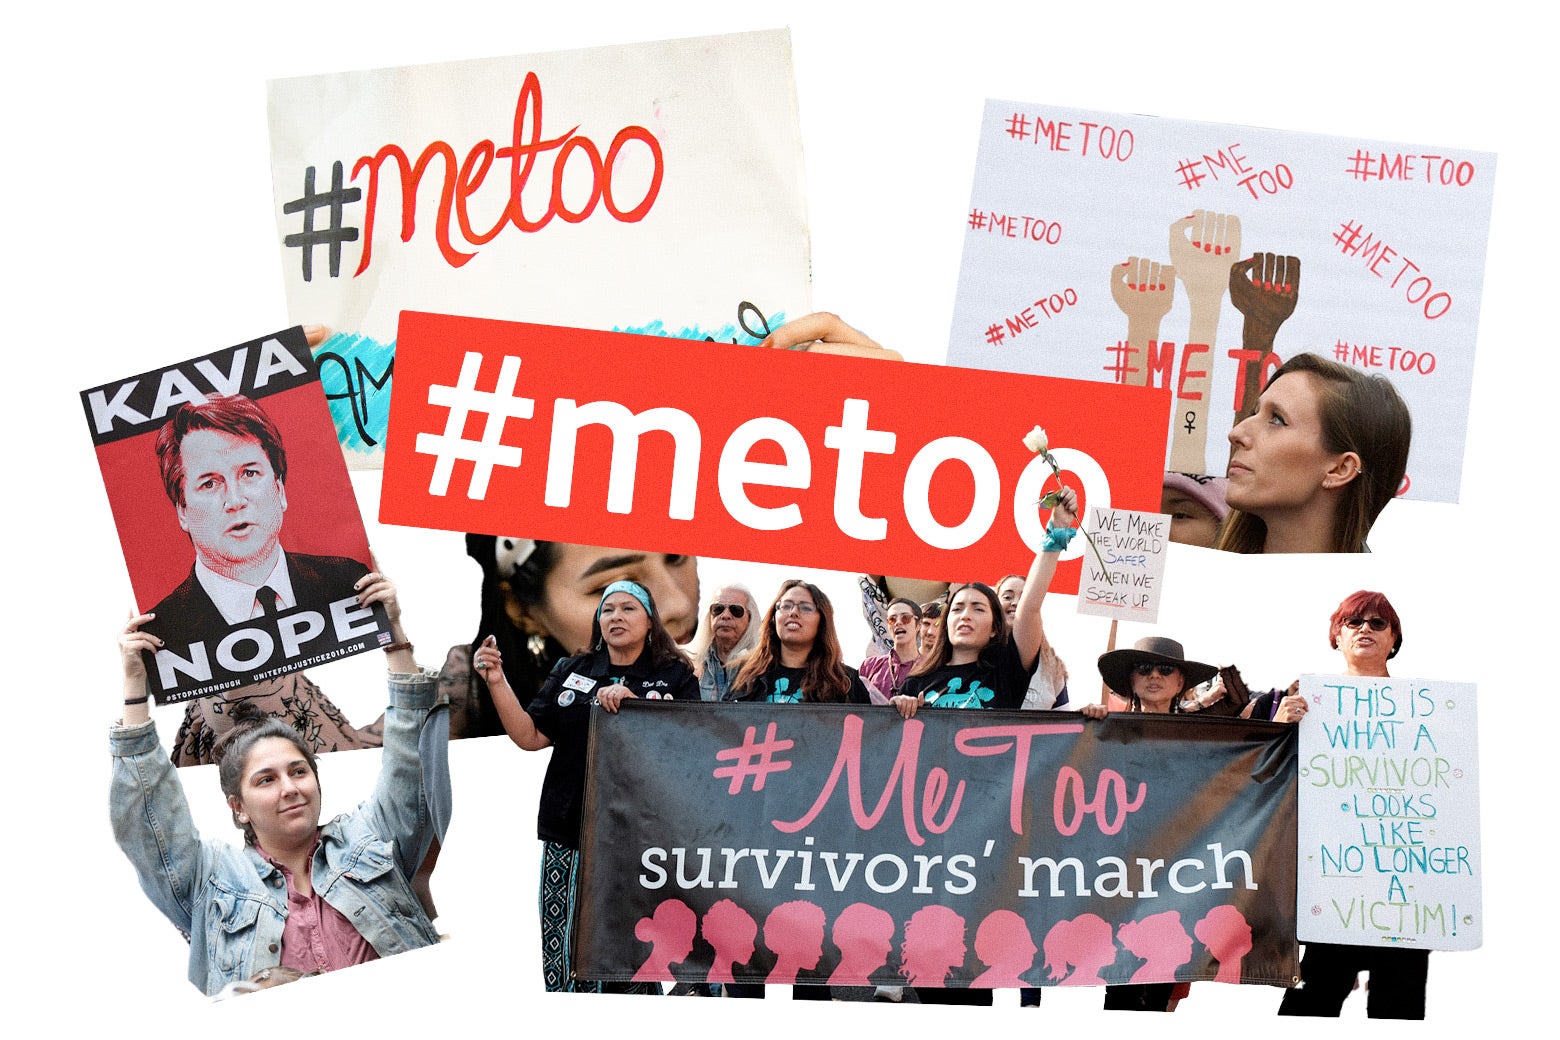 Protesters hold up #MeToo and other related signs in a collage image.